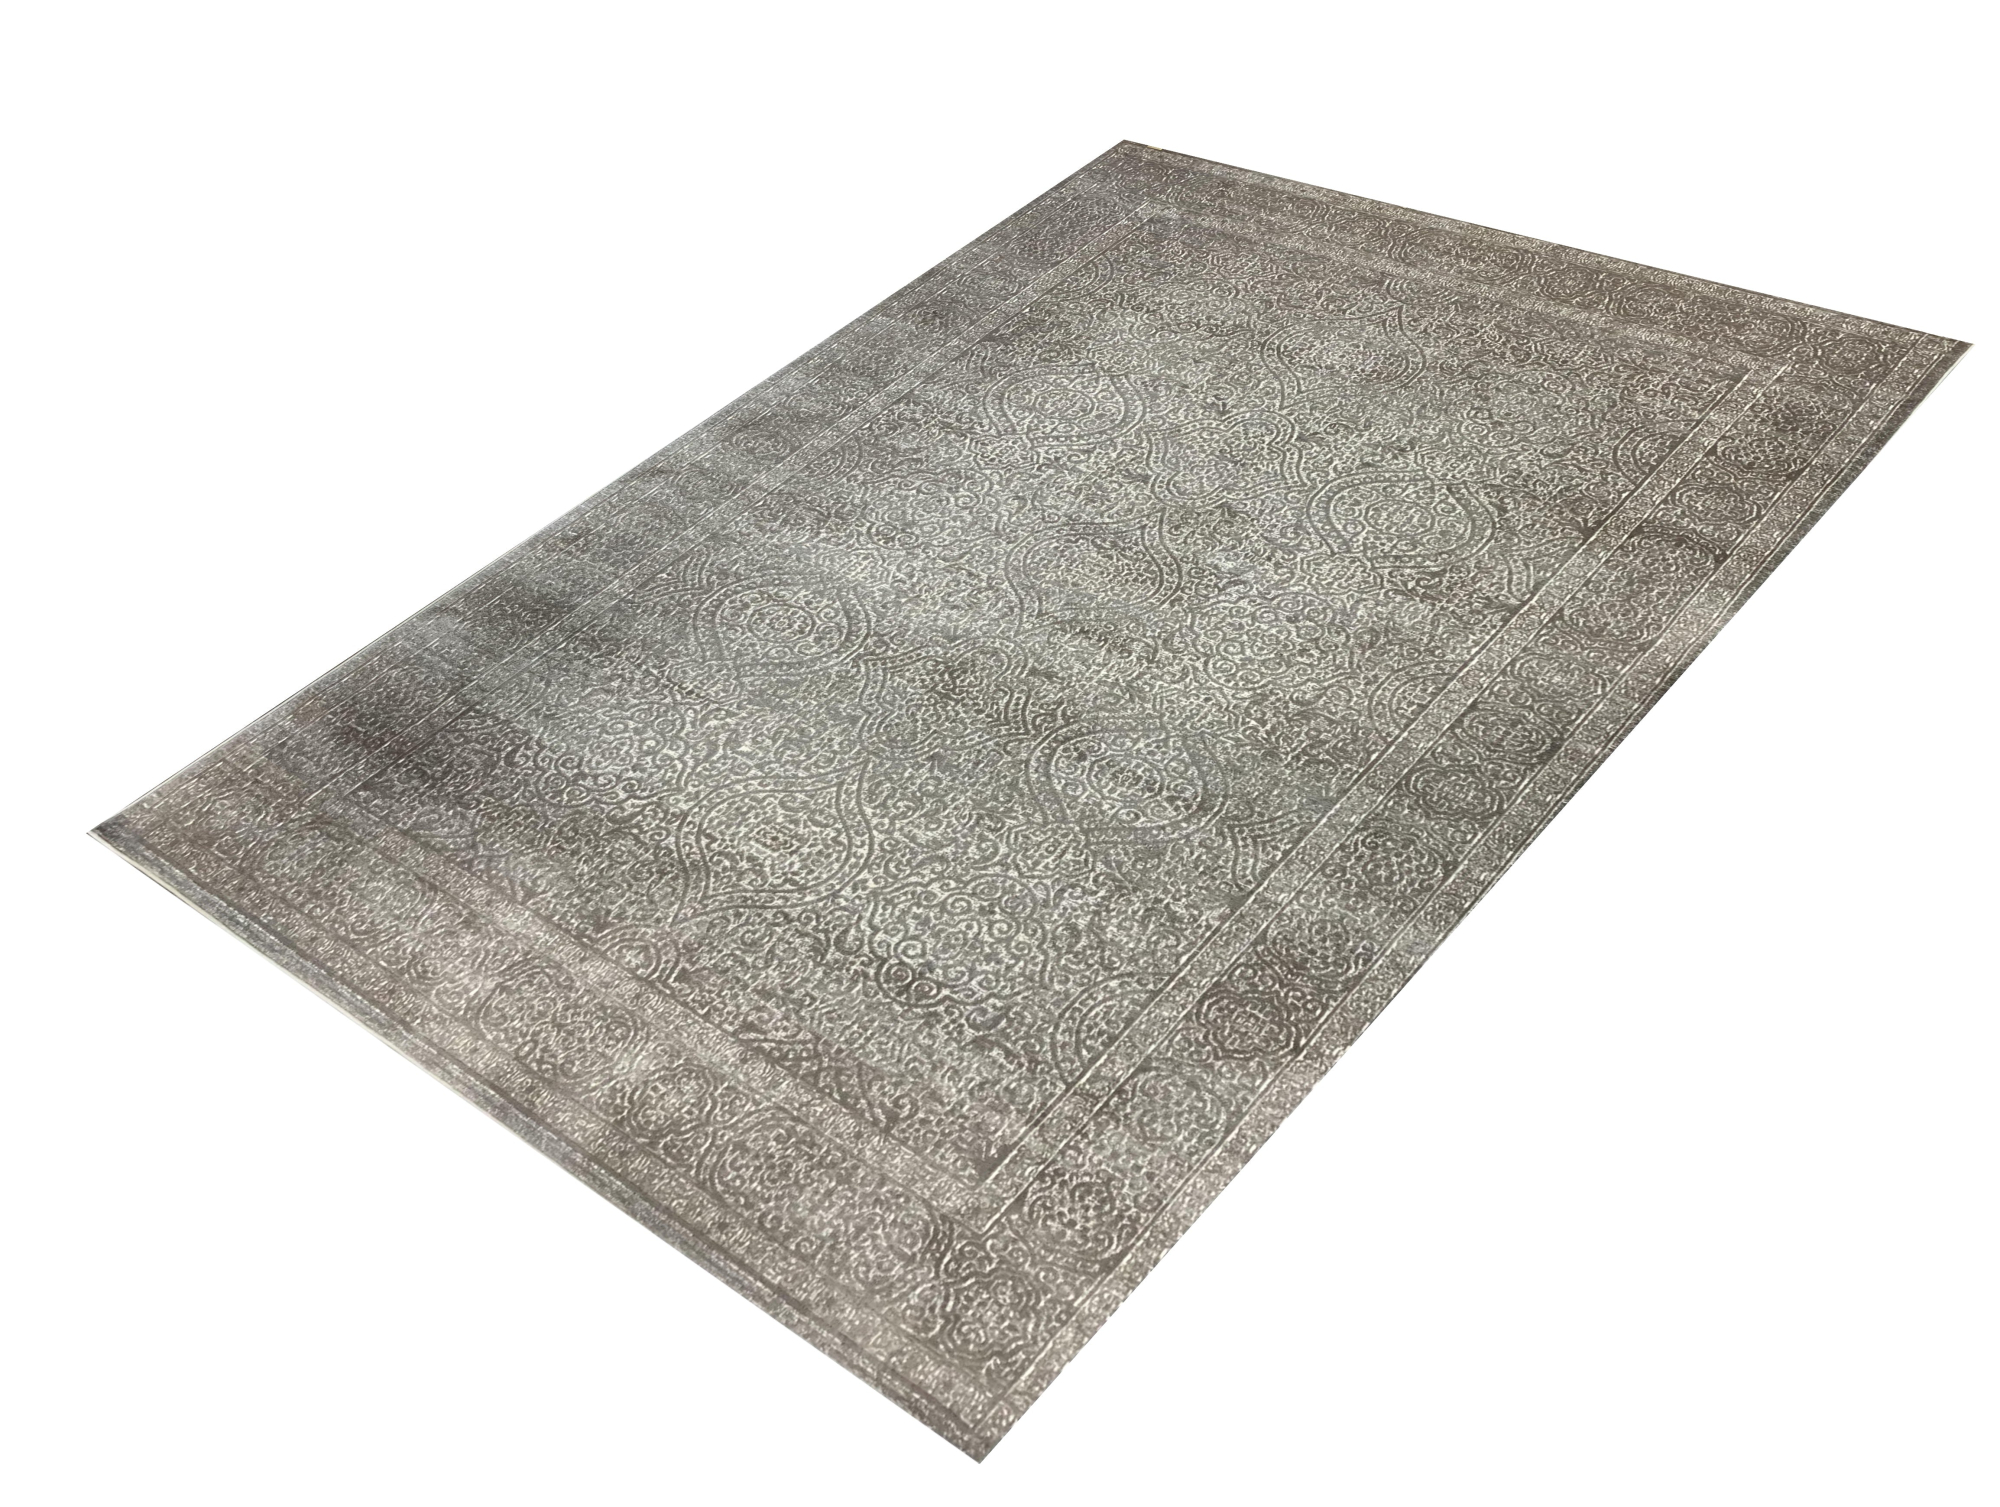 Rhapsody Grey Woven Rug-Area rug for living room, dining area, and bedroom